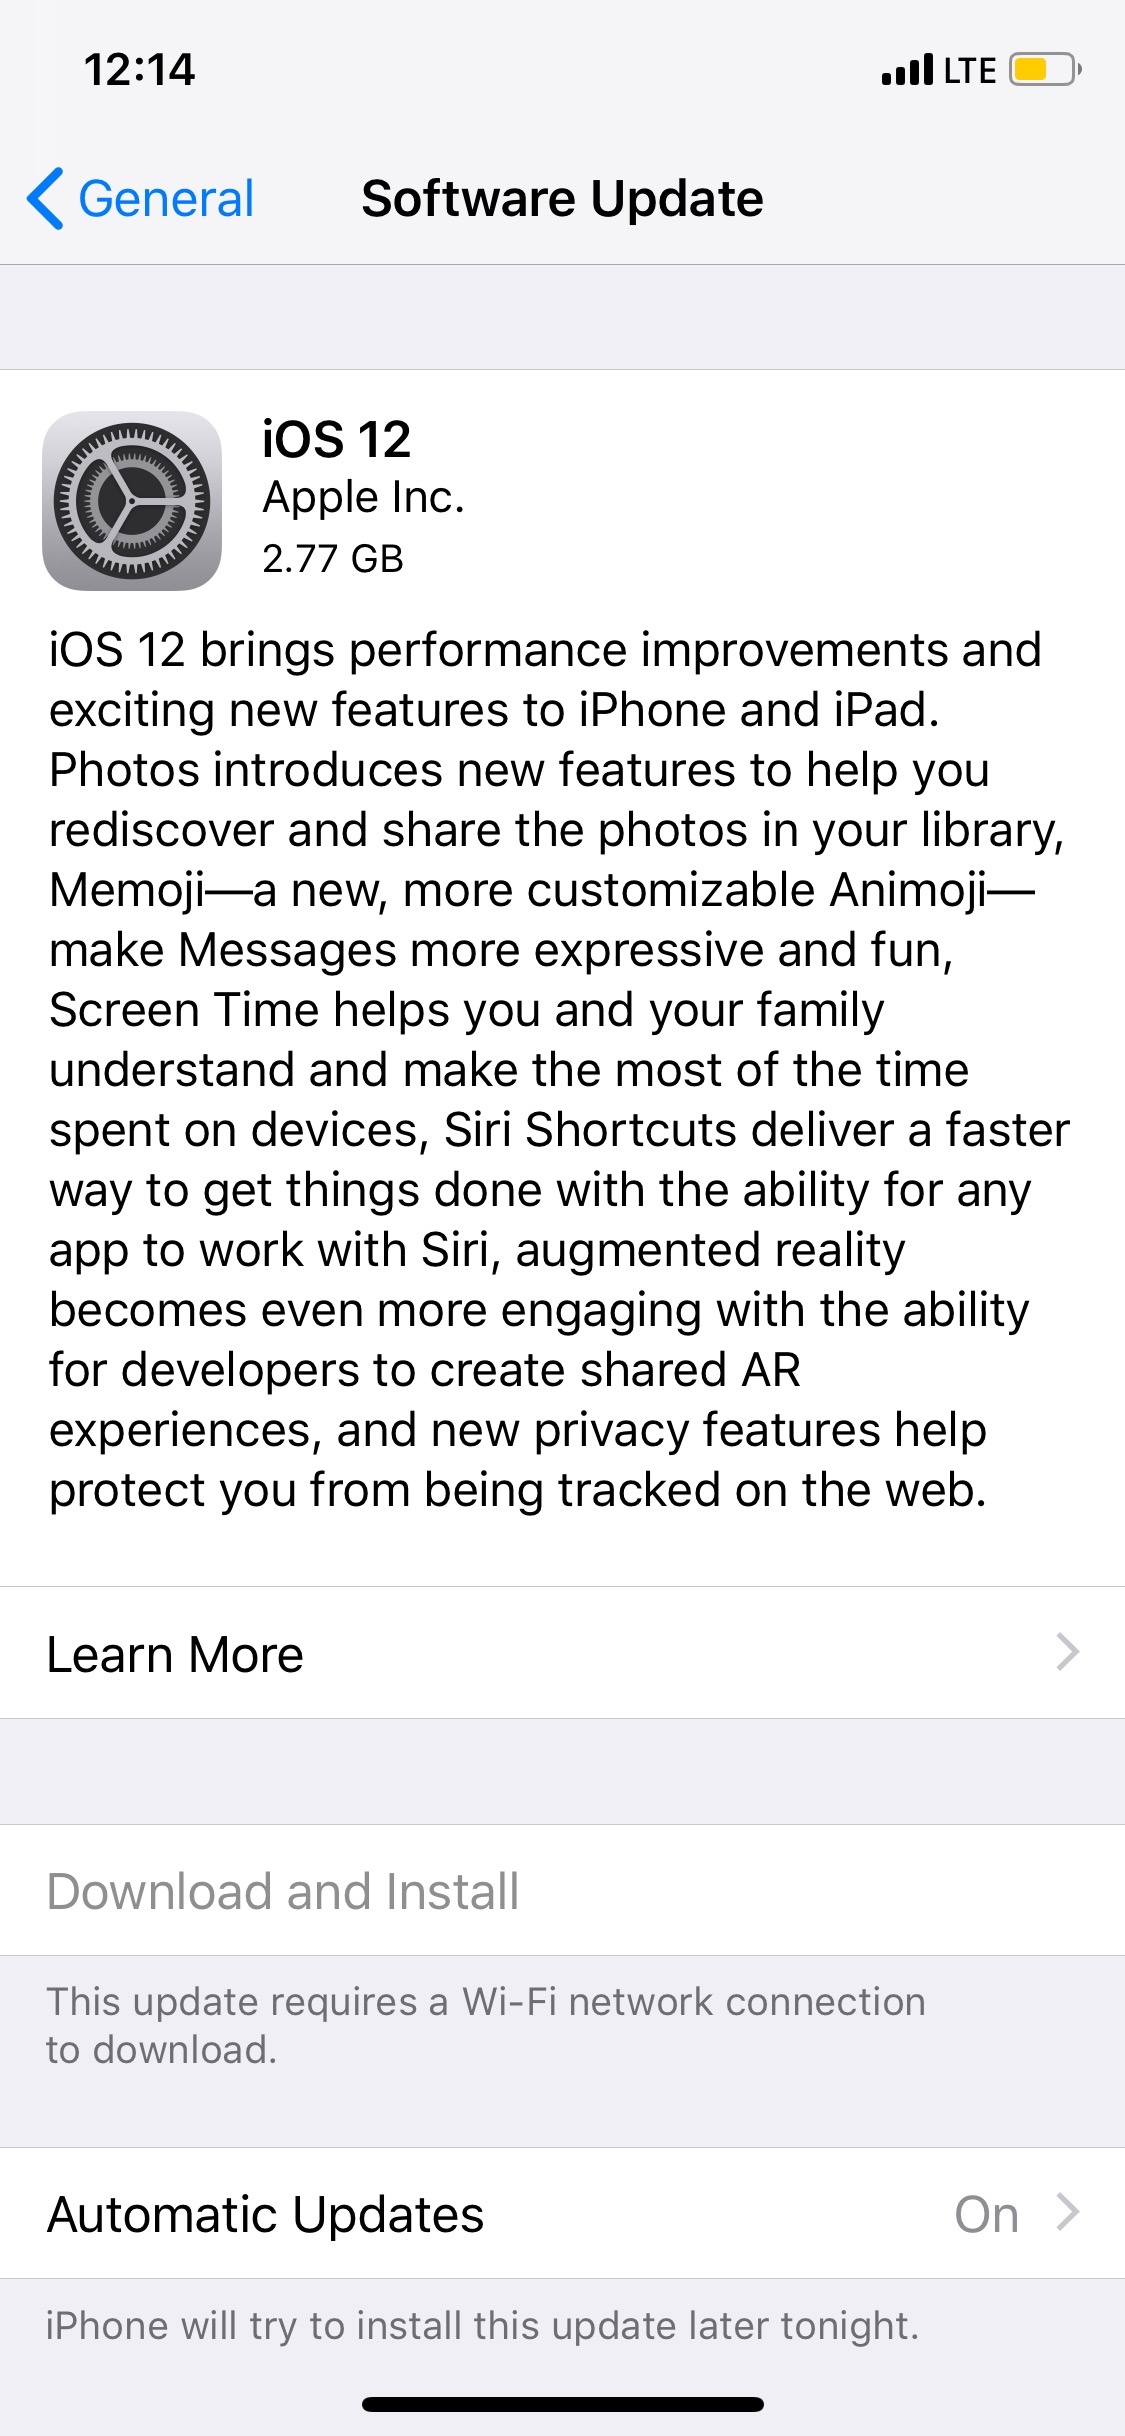 iOS 12 Release Notes